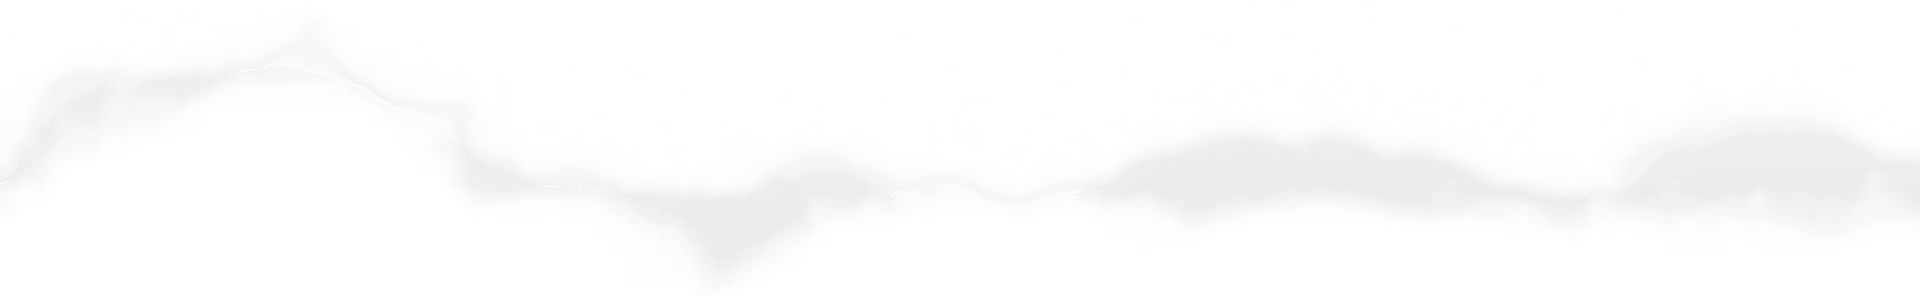 A green and white background with some shapes